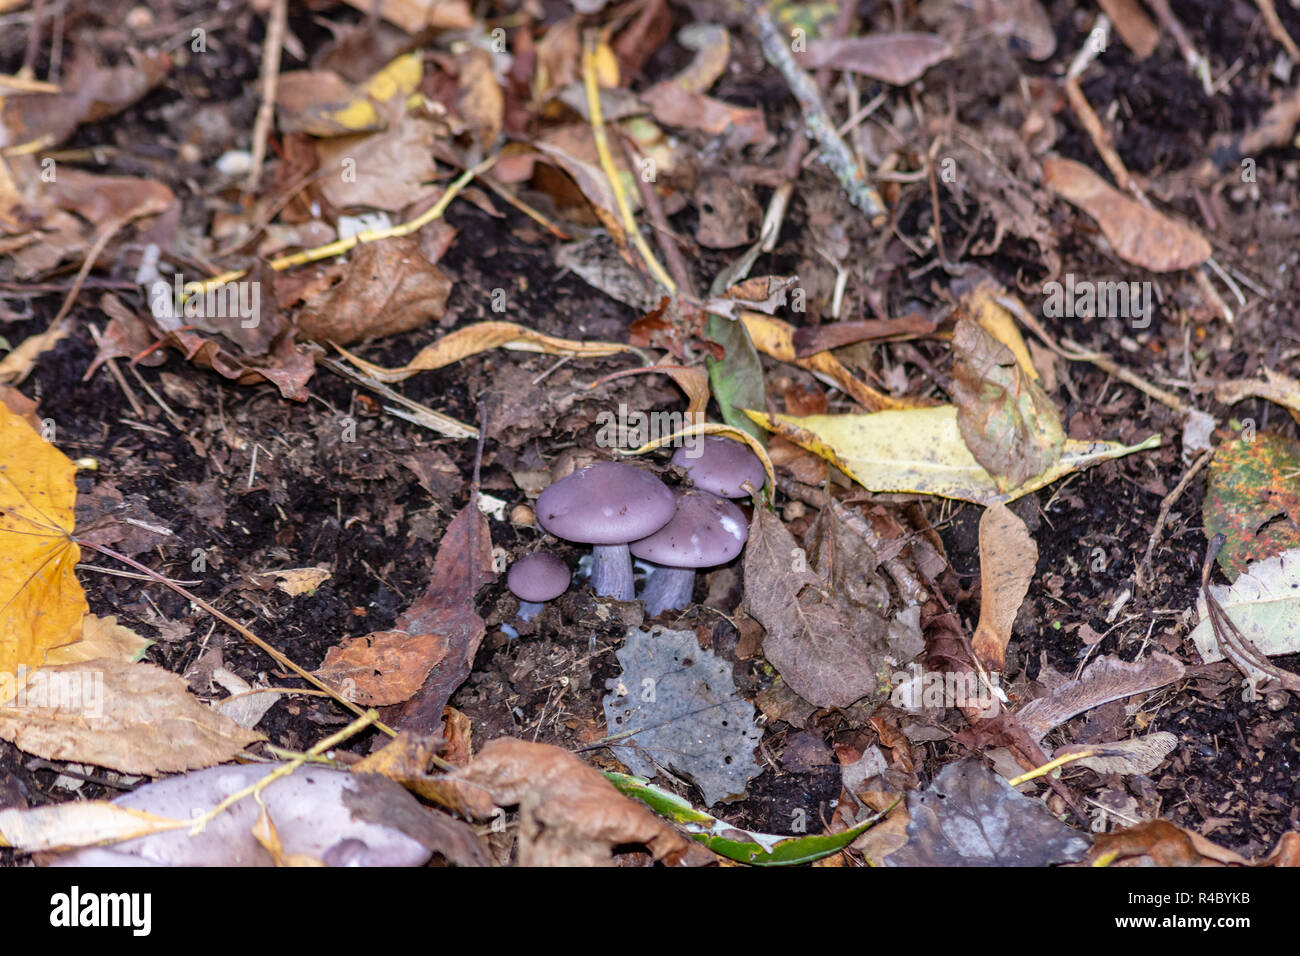 A cluster of small wood blewit (Lepista Nuda) fungi growing amongst leaf litter and fallen autumn leaves Stock Photo